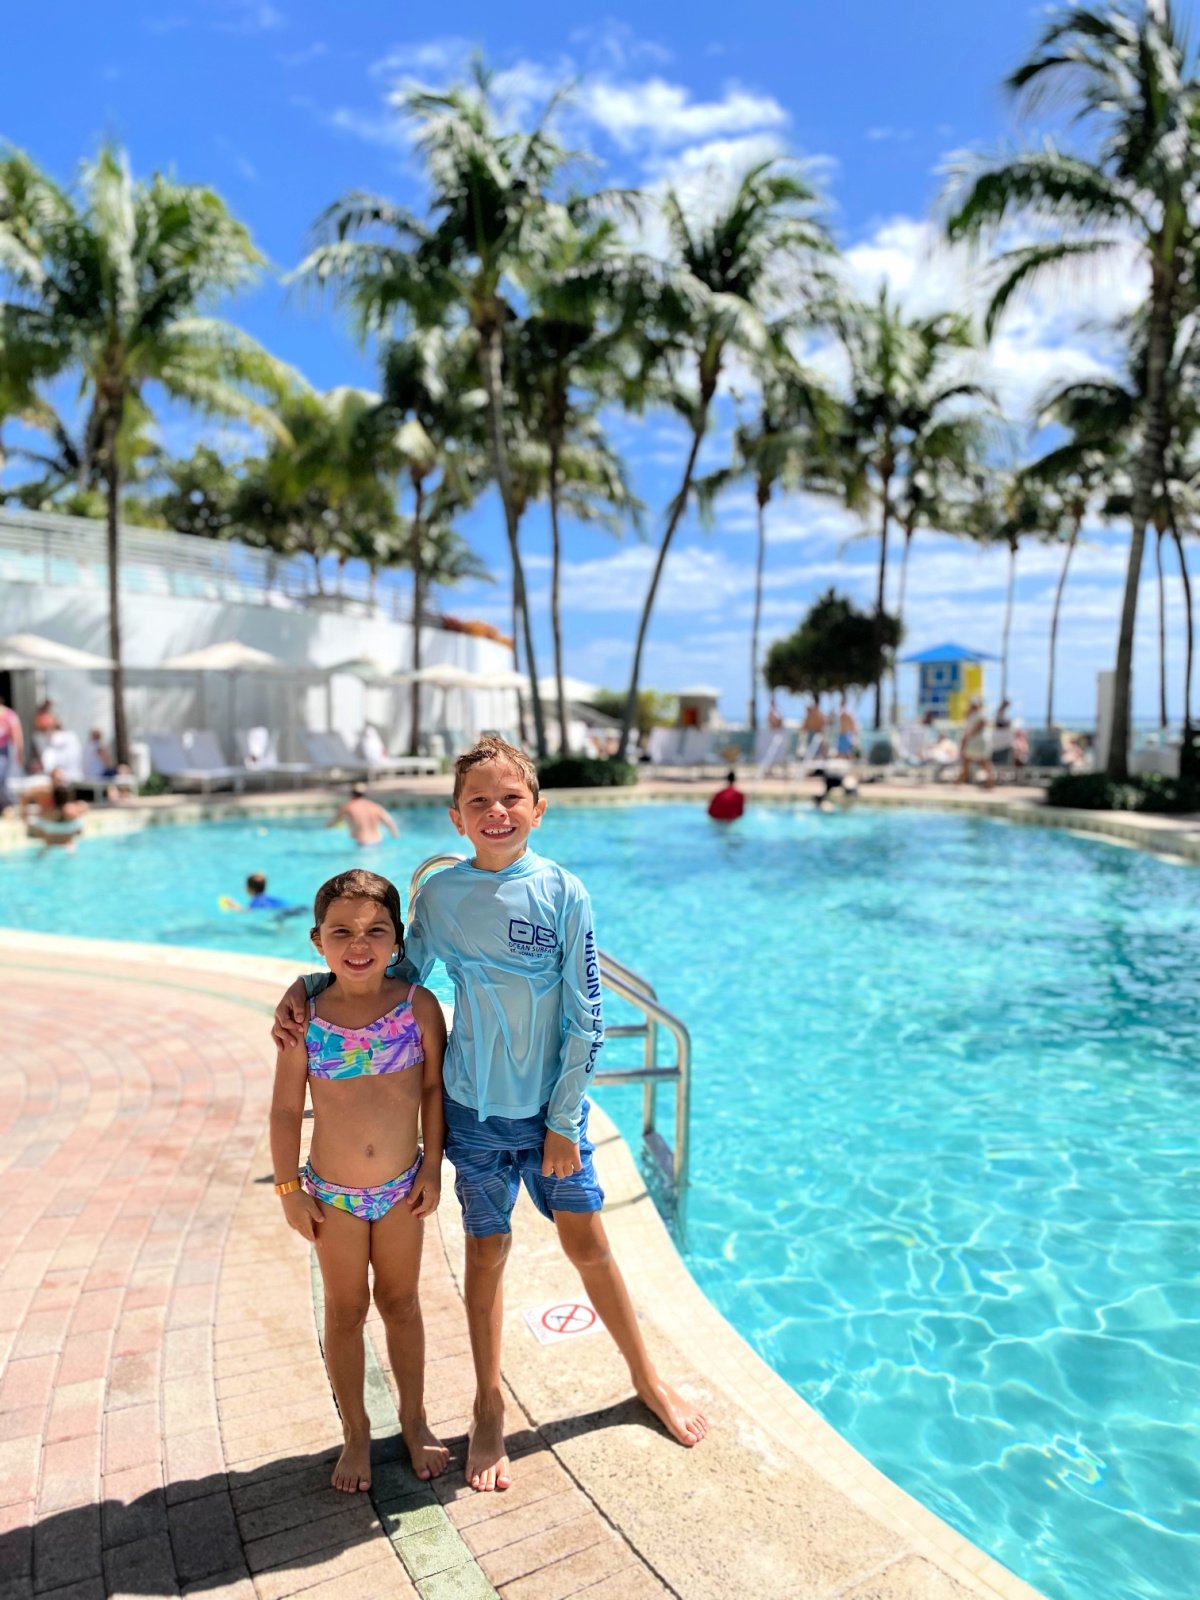 Two children standing next to a pool.